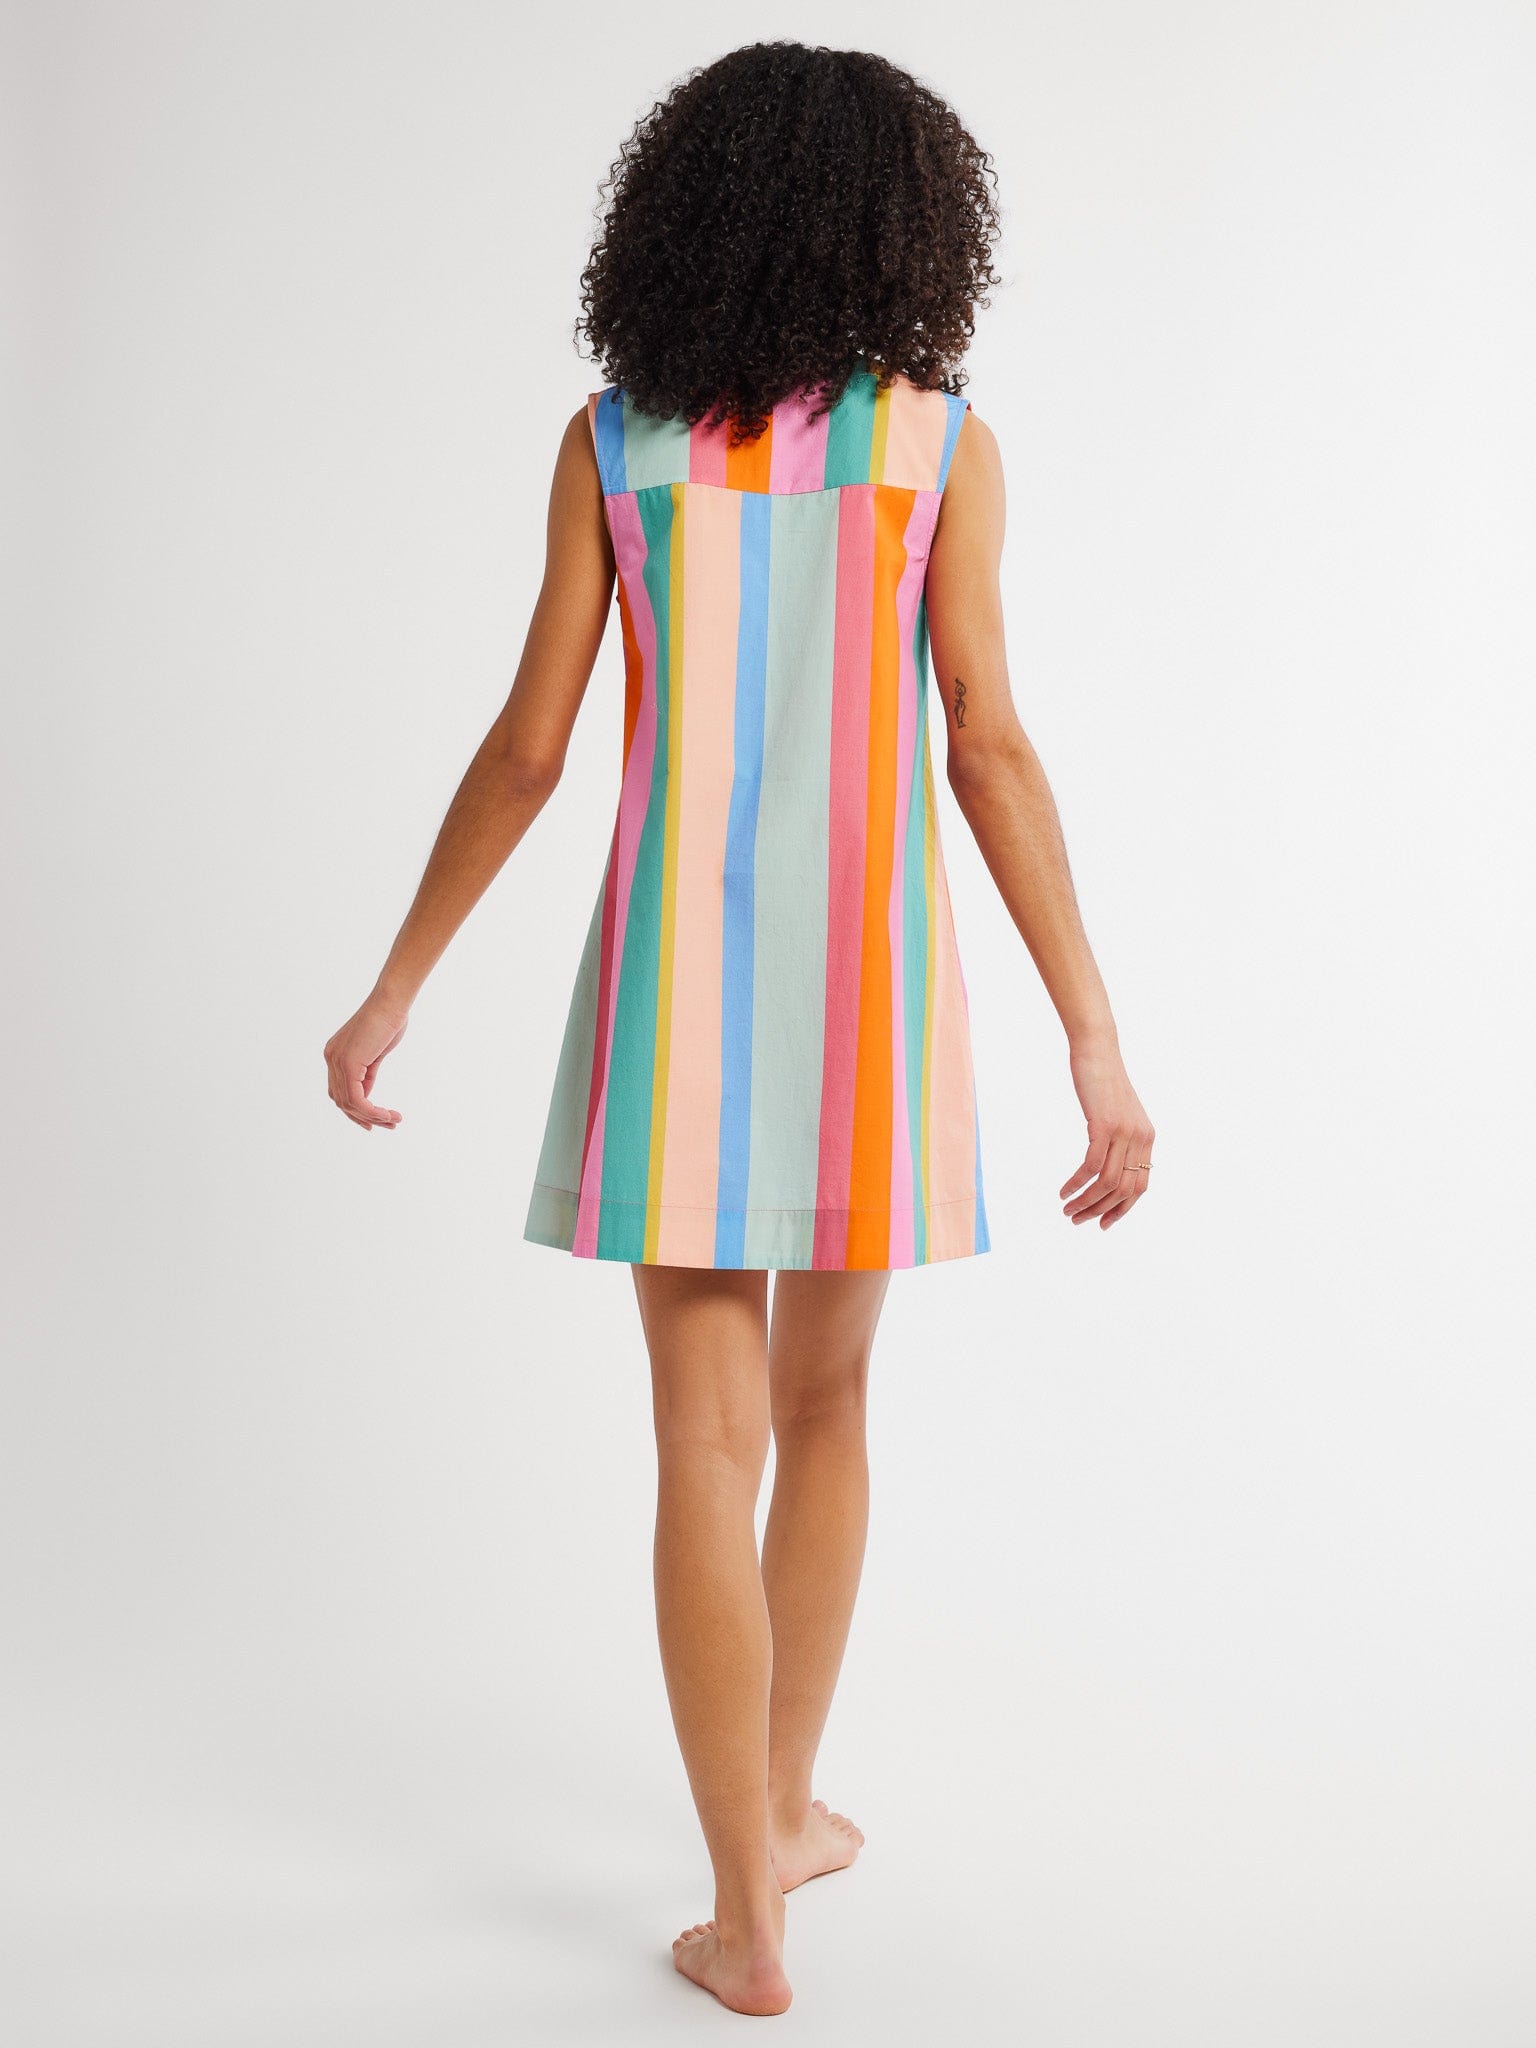 MILLE Clothing Penny Dress in Confetti Stripe